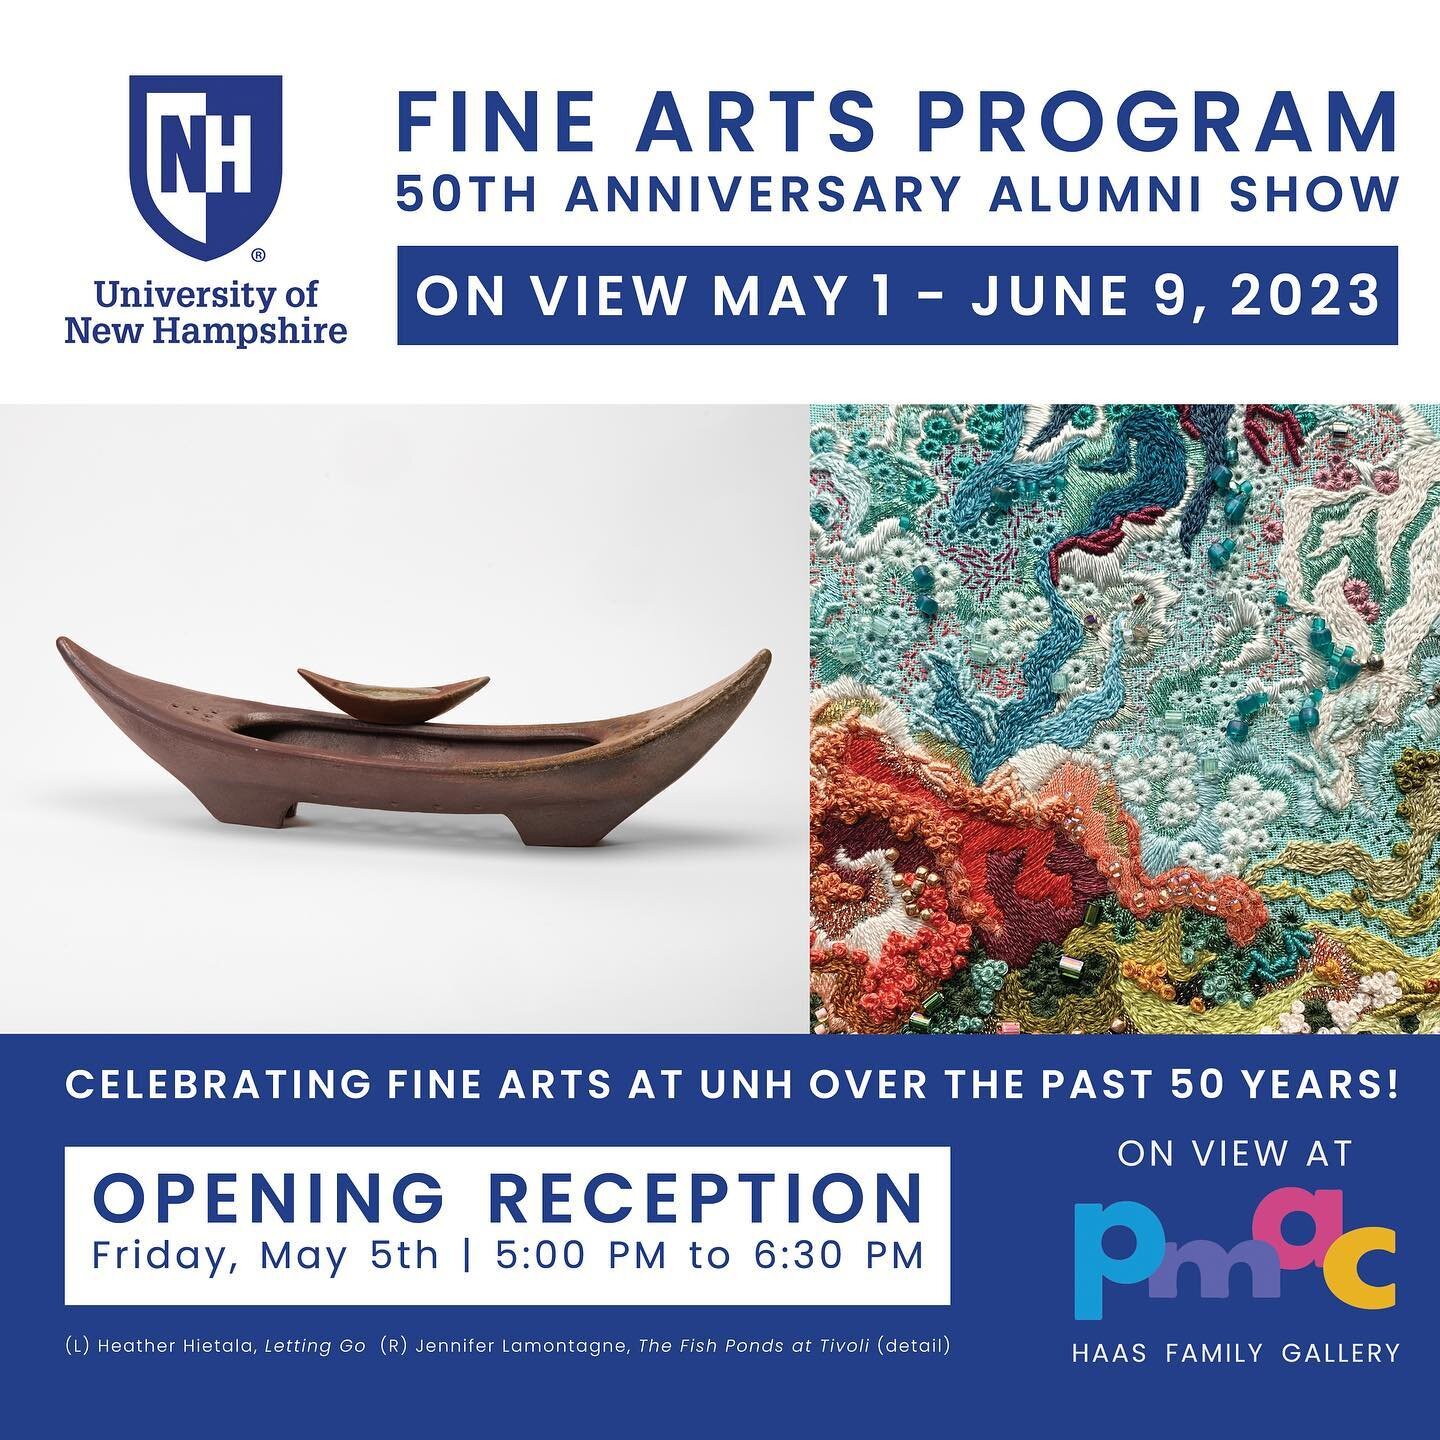 Spent the day installing the UNH Fine Arts Program 50th Anniversary Show at @pmacportsmouth with @woodchip47 ✨ Stop by the opening reception next Friday, May 5th to see the work. We have 22 artists from the graduating class of 1963 all the way to 202